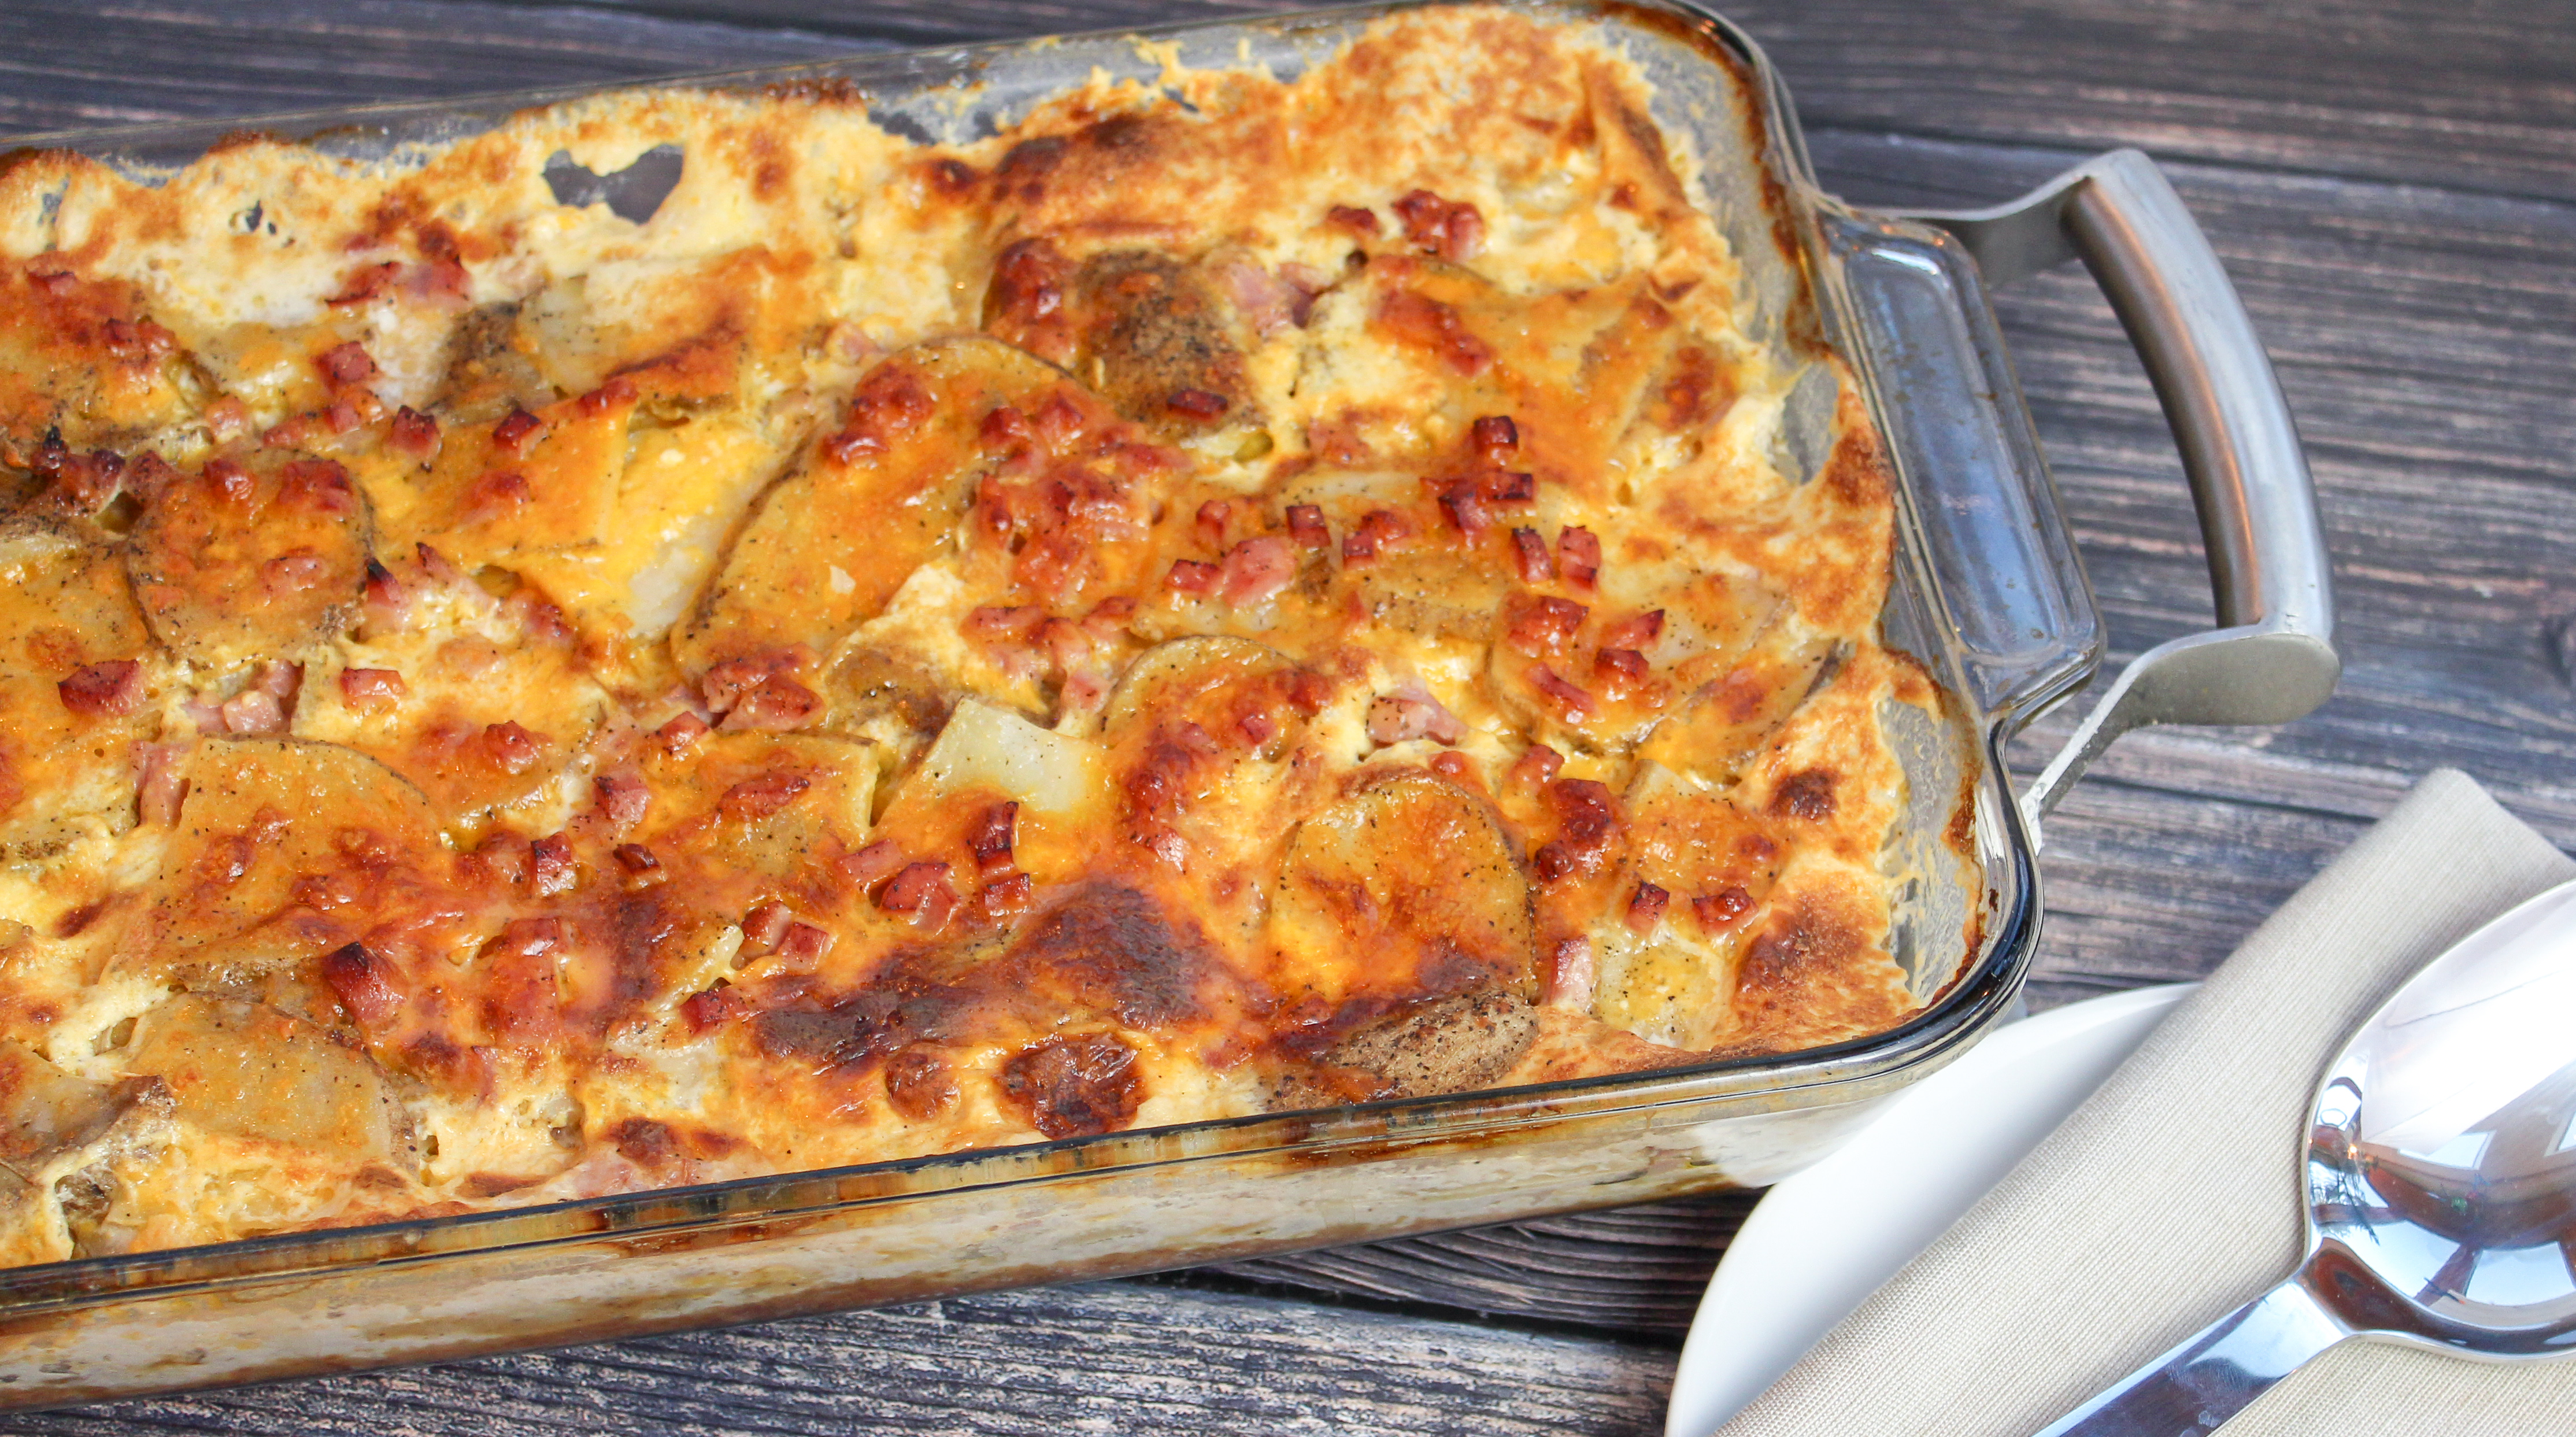 Sliced potatoes, cheese, and diced ham baked in a casserole dish